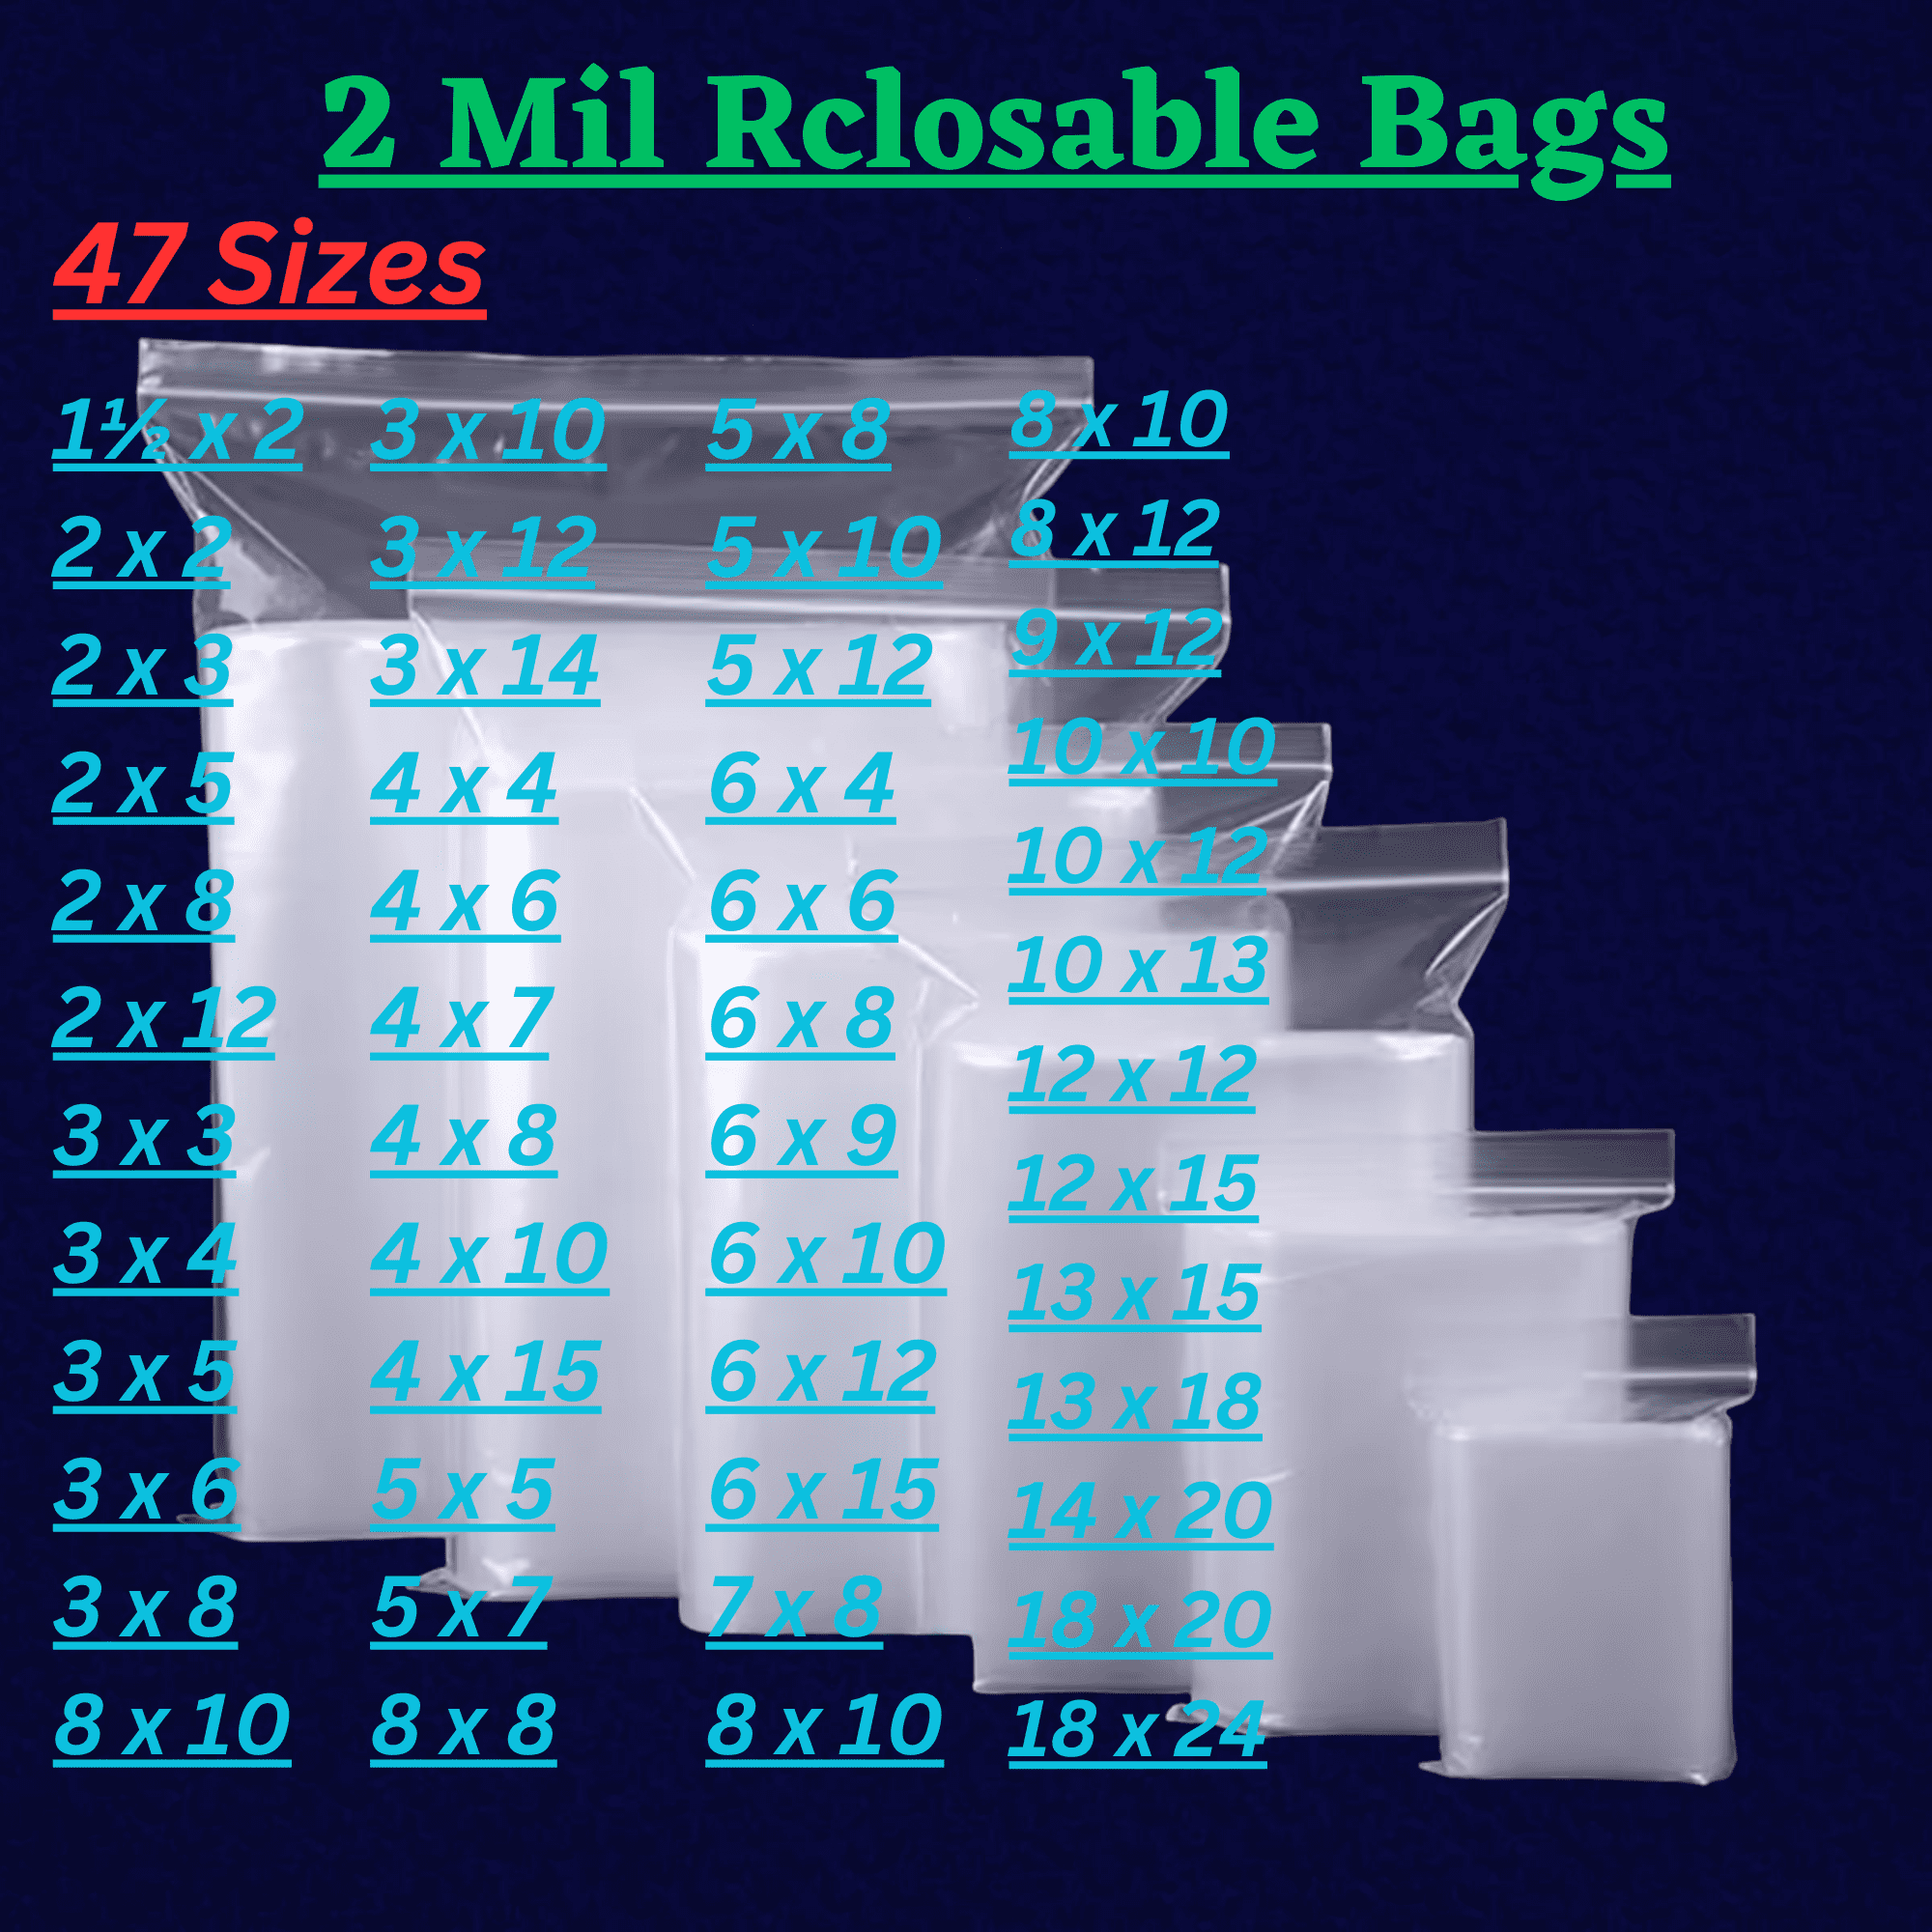 Amiff Clear Plastic Reclosable Zipper Bags, 3 x 5 Inches. 100 Pack 2 Mil  Reclosable Plastic Bags with Zipper Closure. Durable Industrial Poly Bags